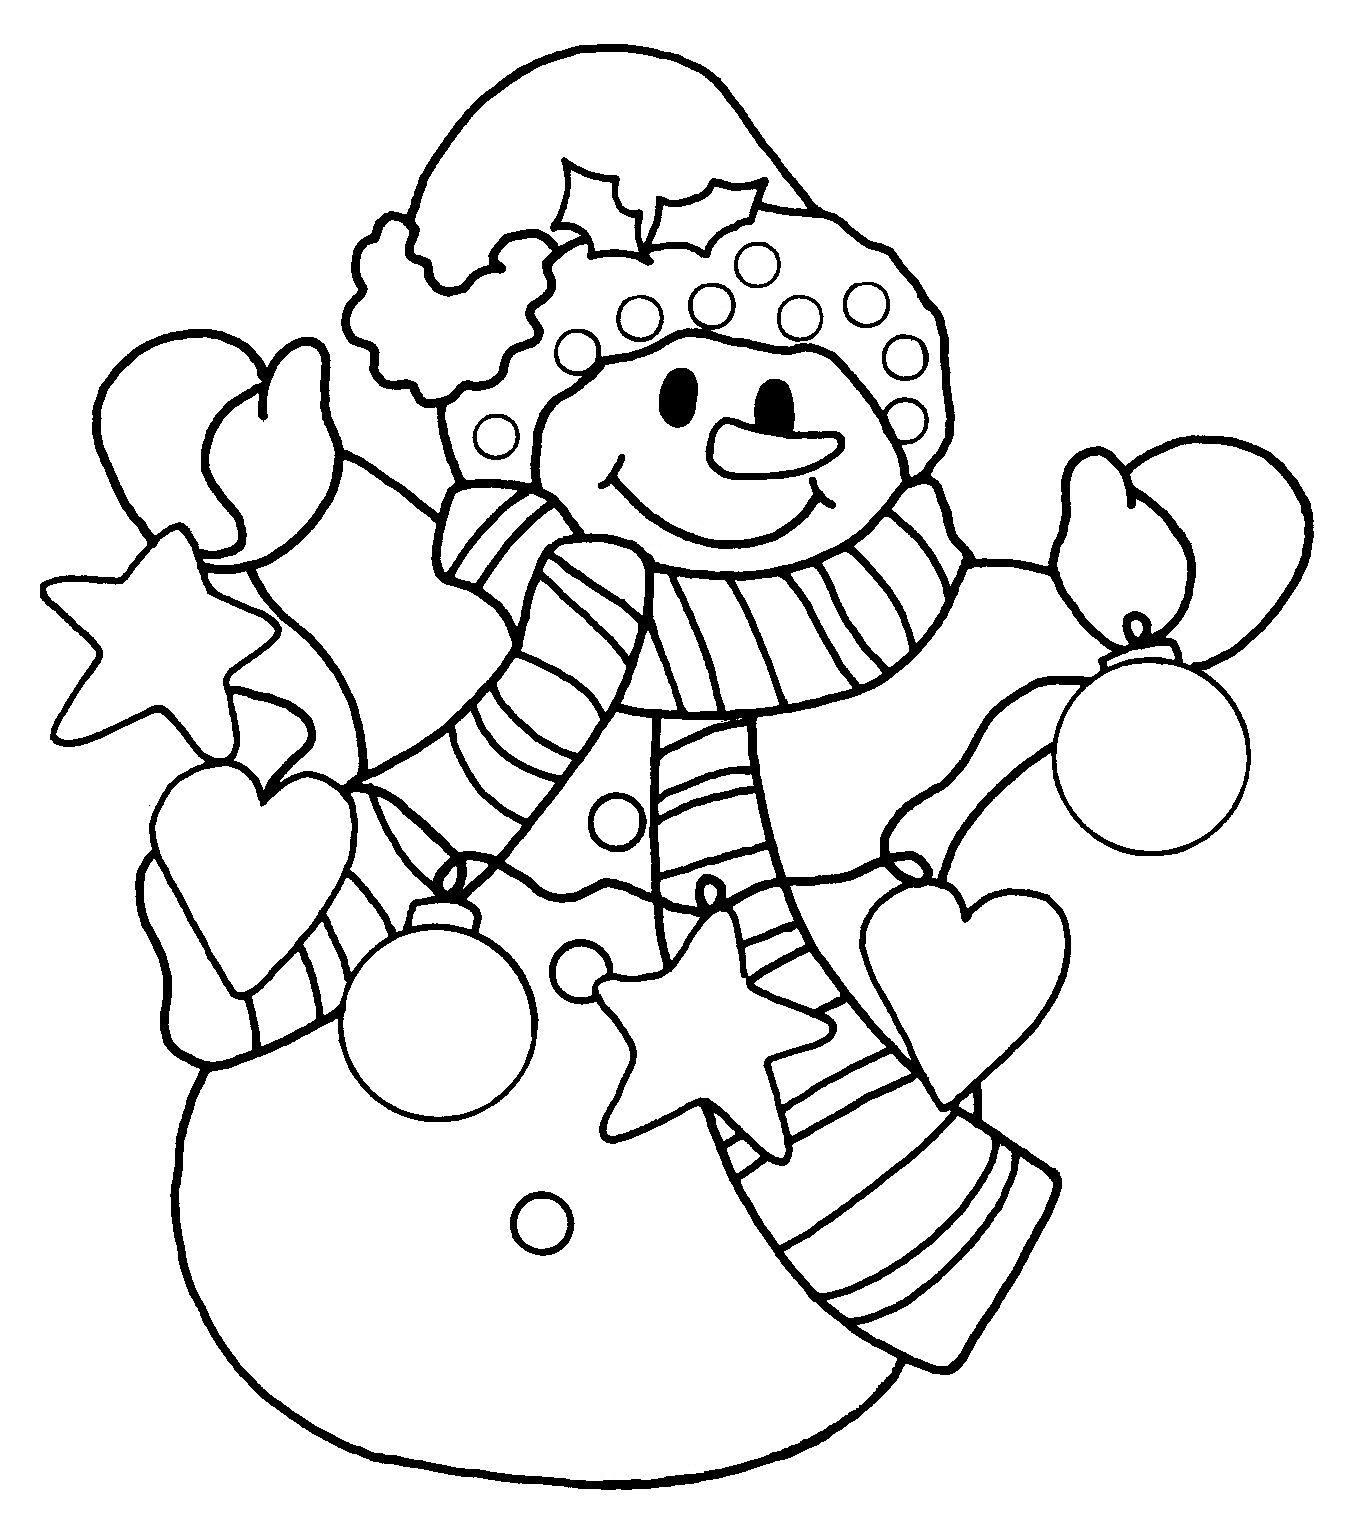 Free Christmas Coloring Pages For Kids
 DZ Doodles Digital Stamps Oodles of Doodles News Freebie